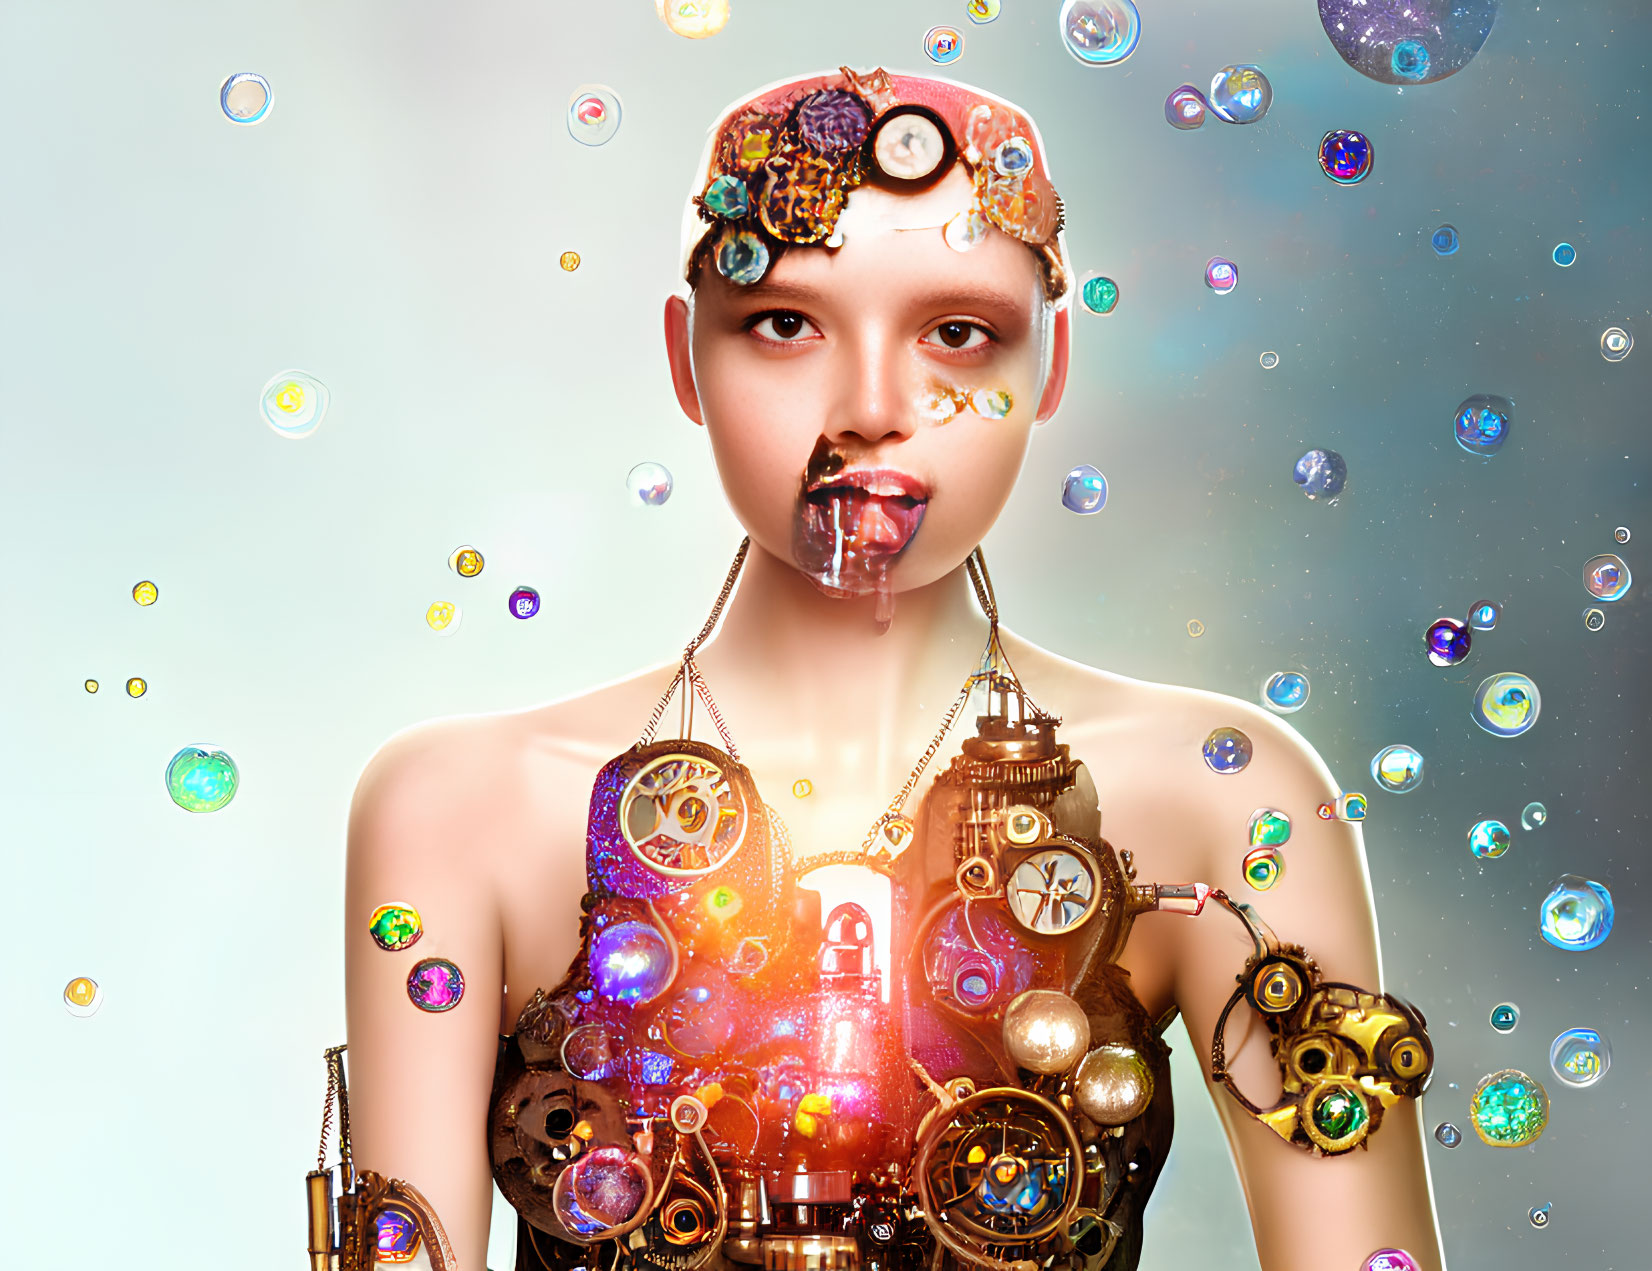 Steampunk-themed digital art with gear elements and floating bubbles